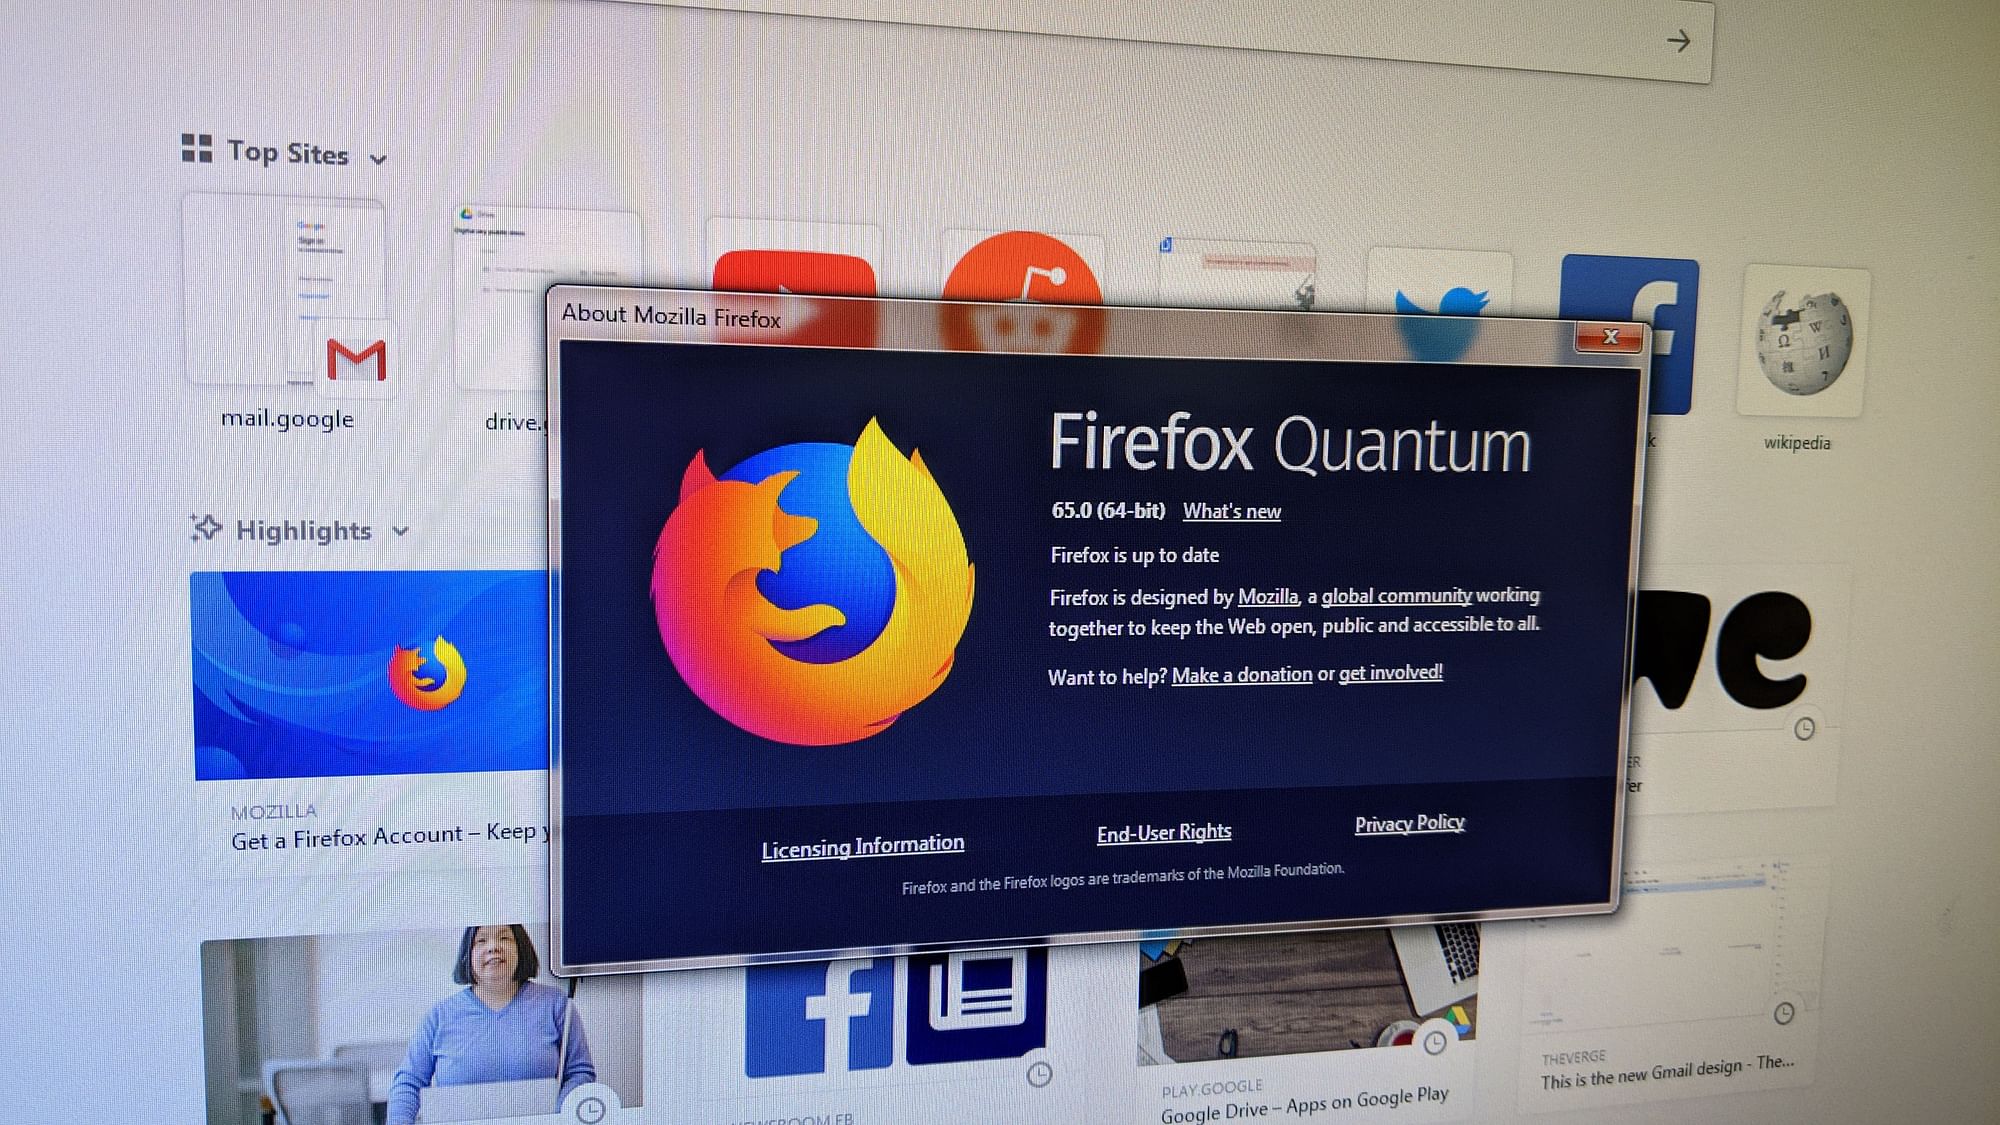 A Firefox bug allows outside users to execute code on your device without permission.